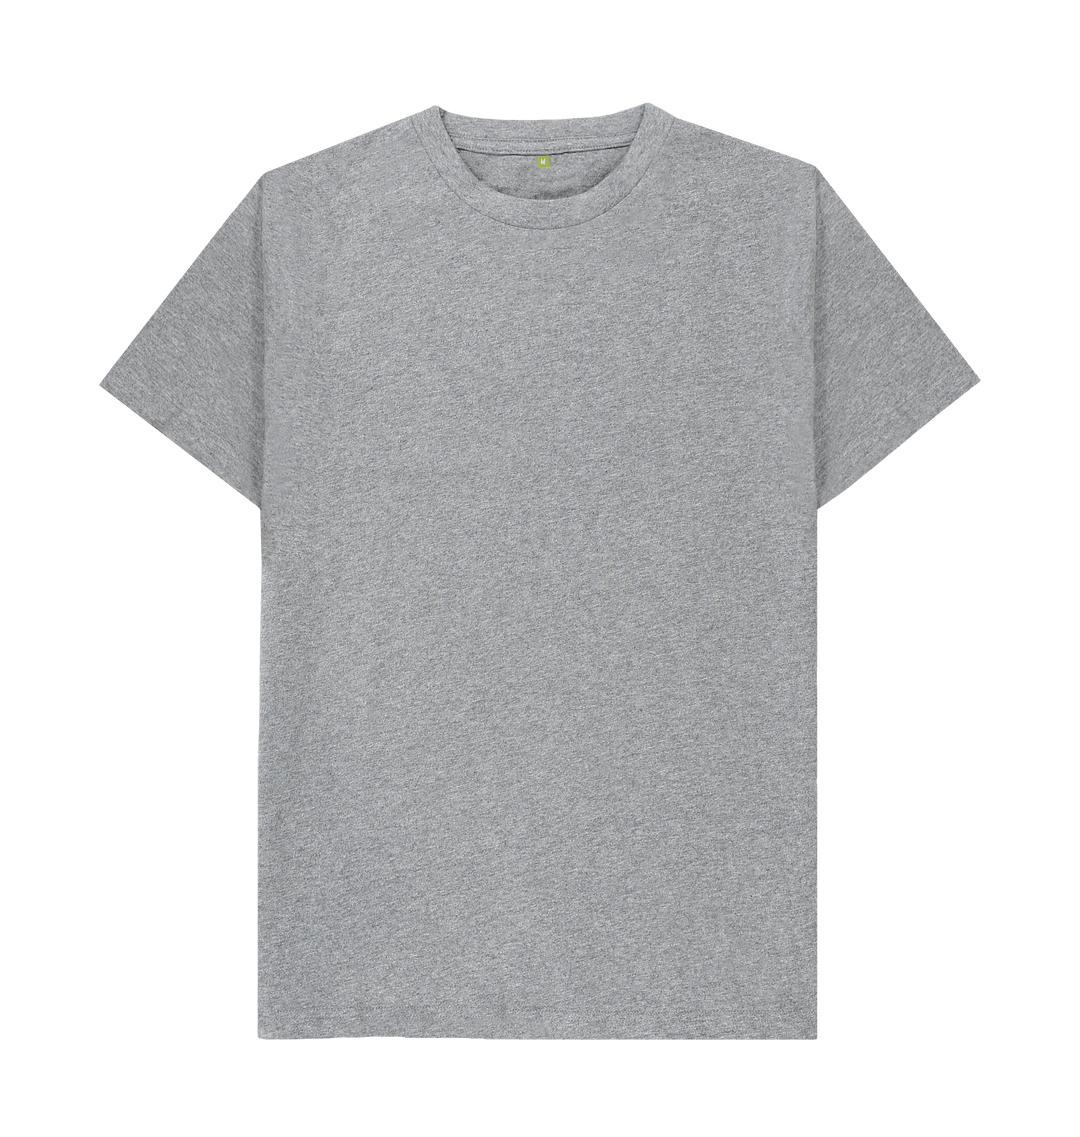 gray t shirt with print